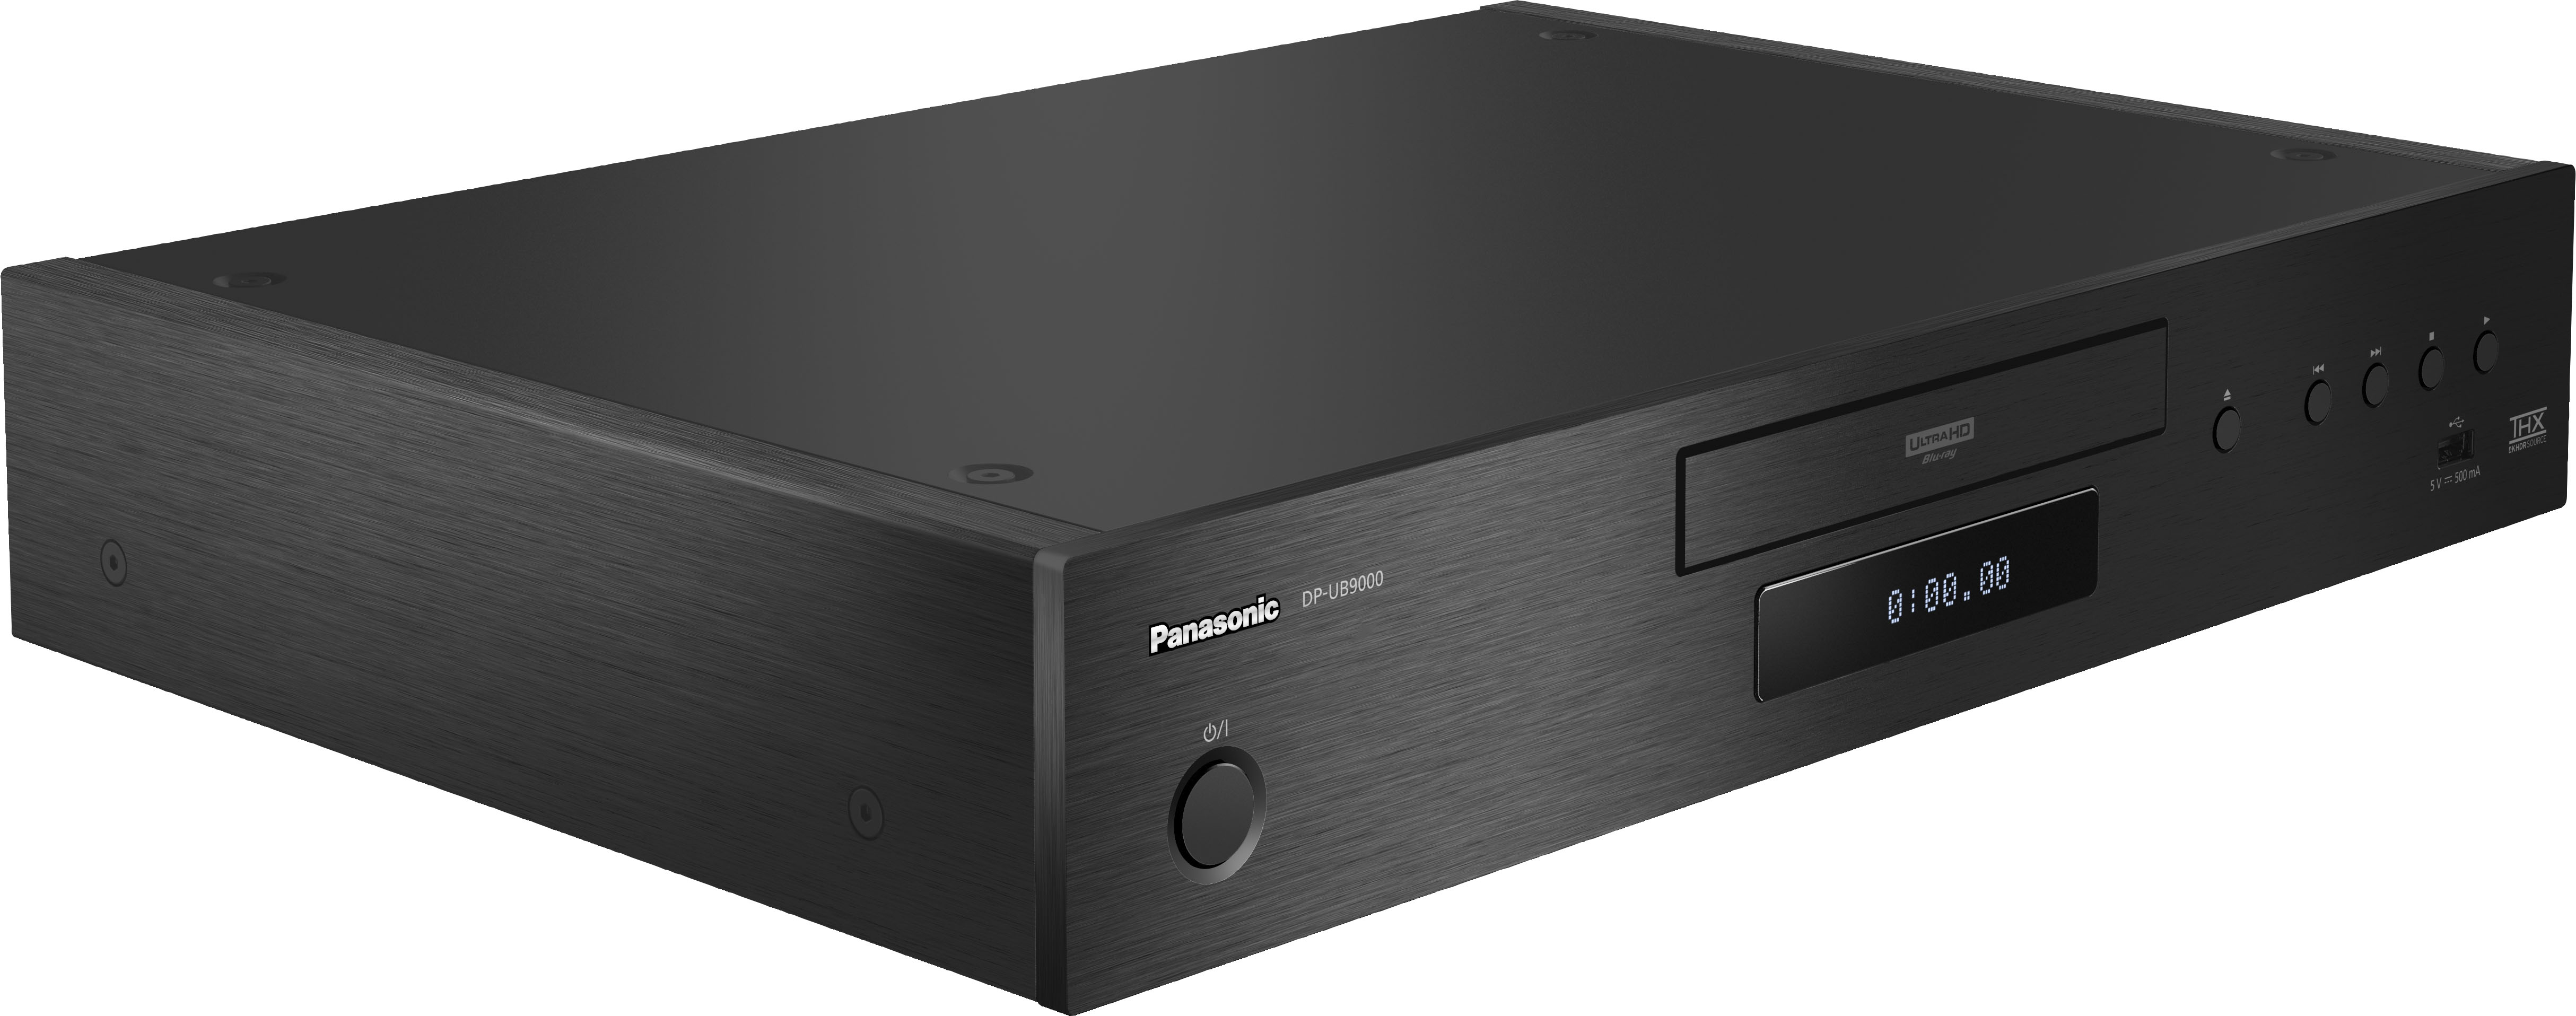 Get the best picture and price with $50 off a Panasonic 4K Blu-ray